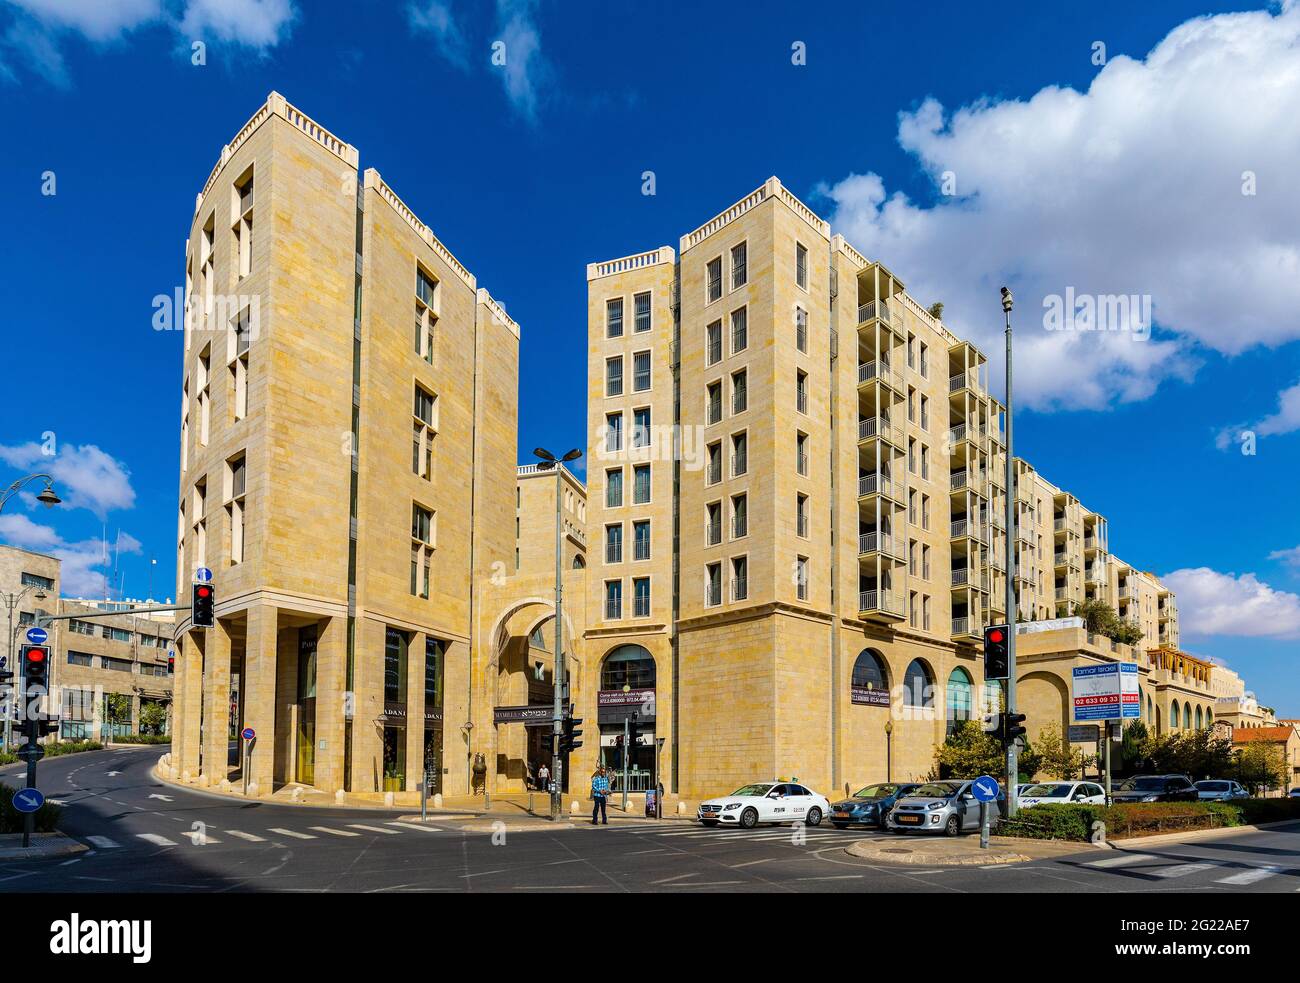 Jerusalem, Israel - October 14, 2017: Mamilla quarter exclusive residential and commercial complex at Ha-Mekhes Square and Yitshak Kariv street near h Stock Photo